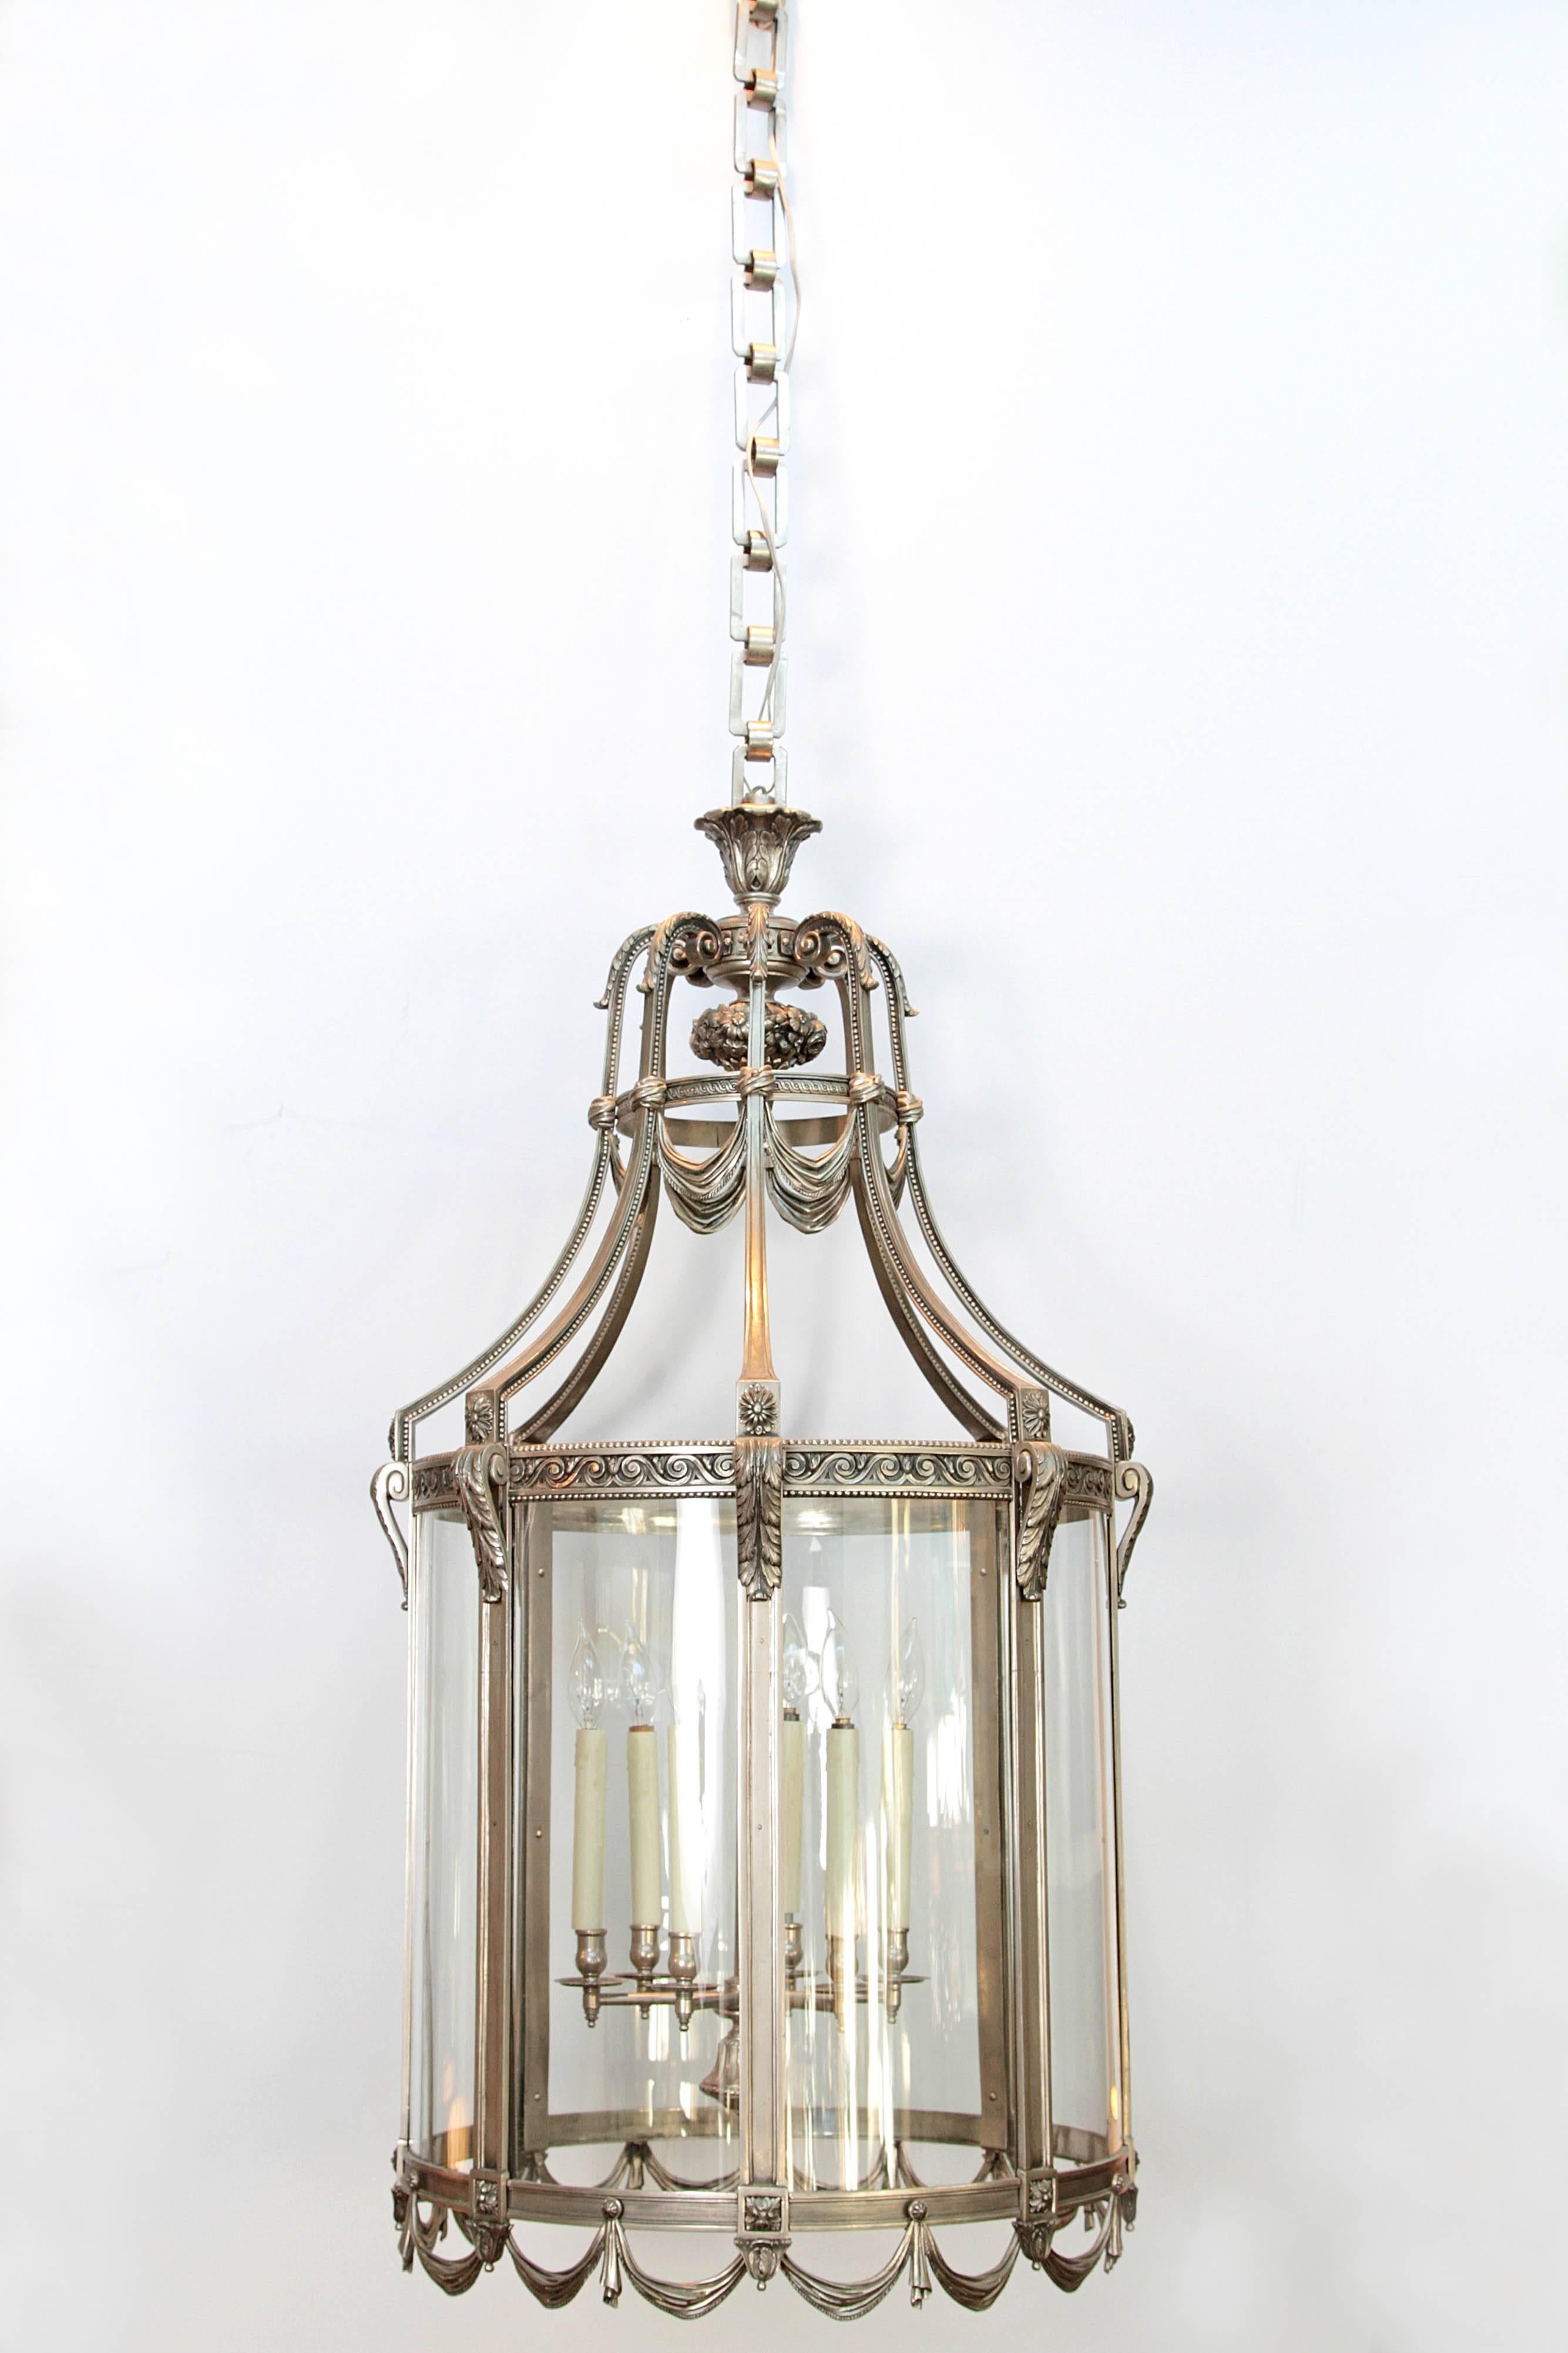 A very large finely cast nickel-plated bronze Art Deco lantern. The top is a basket of fruit with swags and curving supports. The eight (8) glass panels are framed in bronze with swags along the base. Centre has a cluster of six (6)